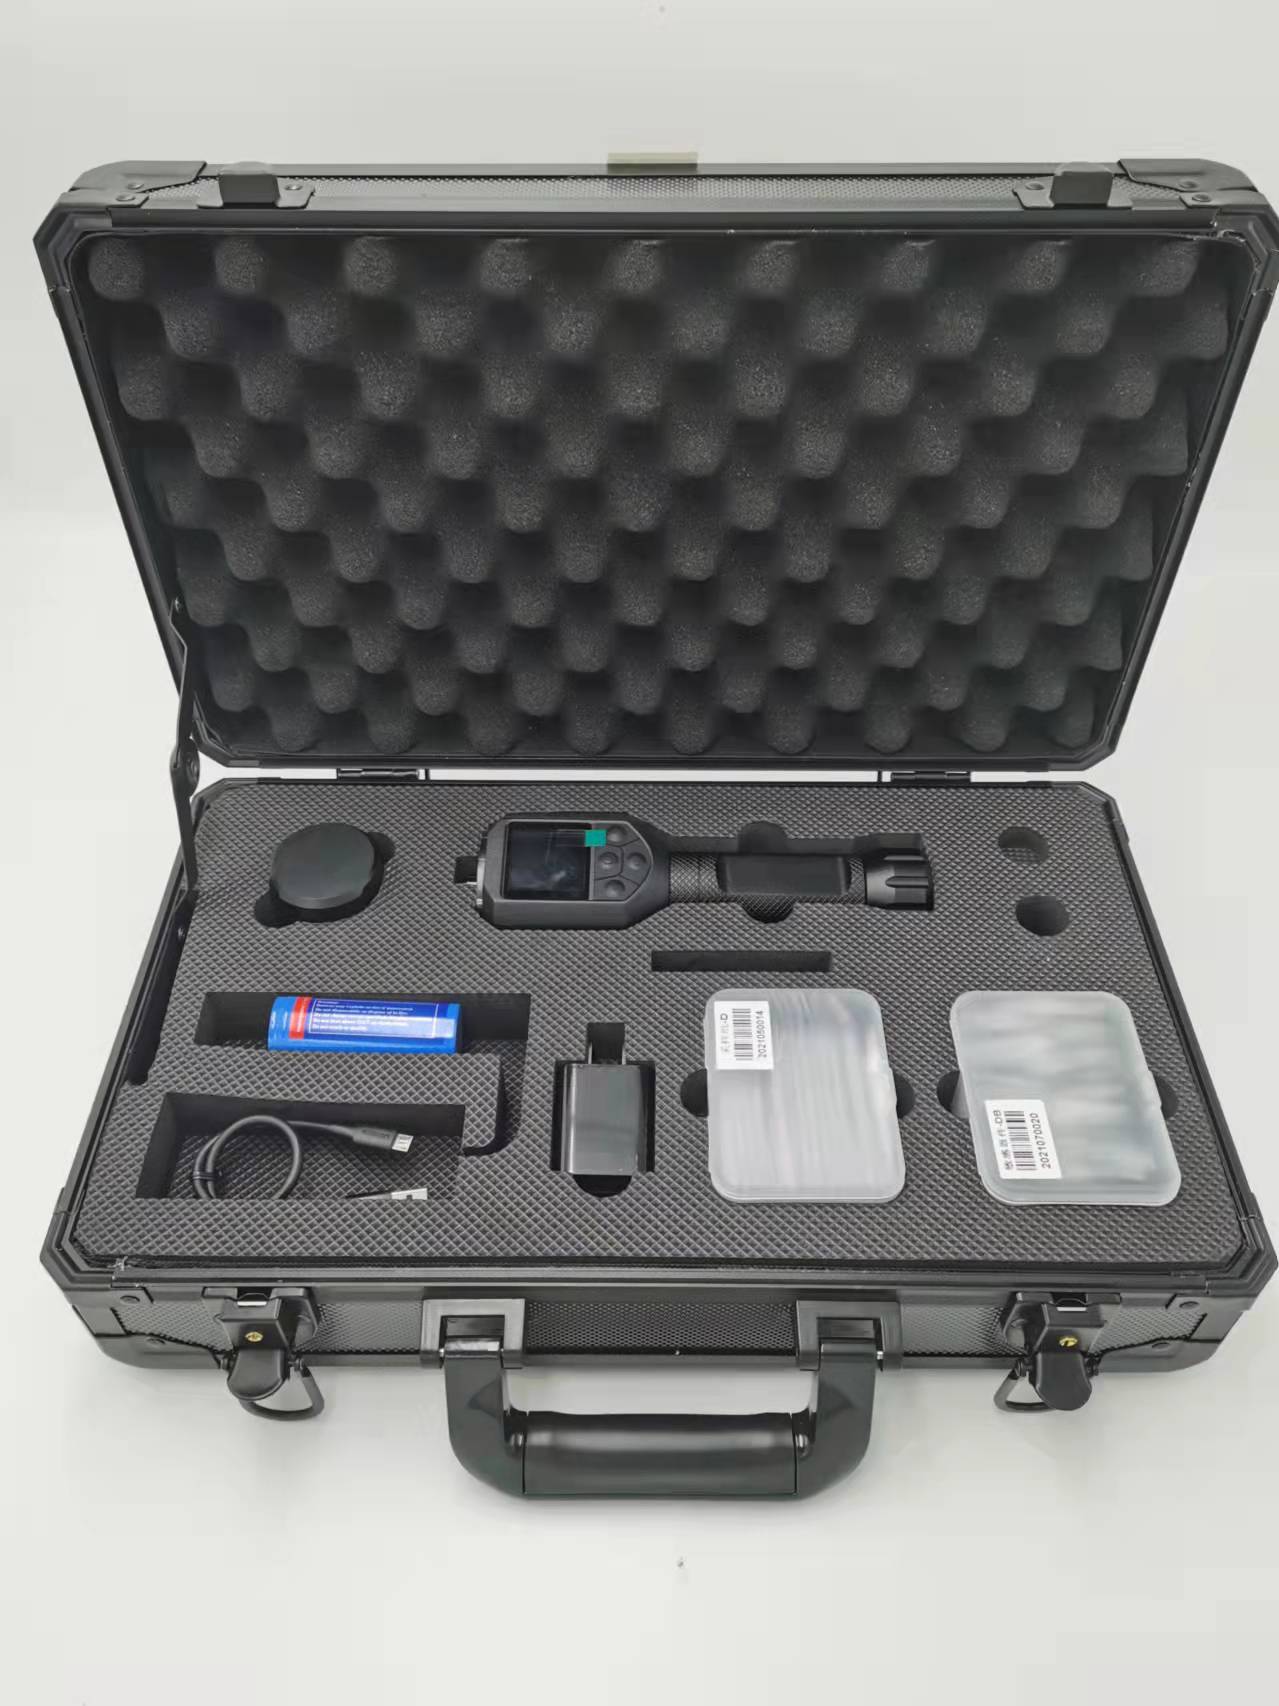 Super Purchasing for Fluid Level Detector - Narcotics Detector – Heweiyongtai